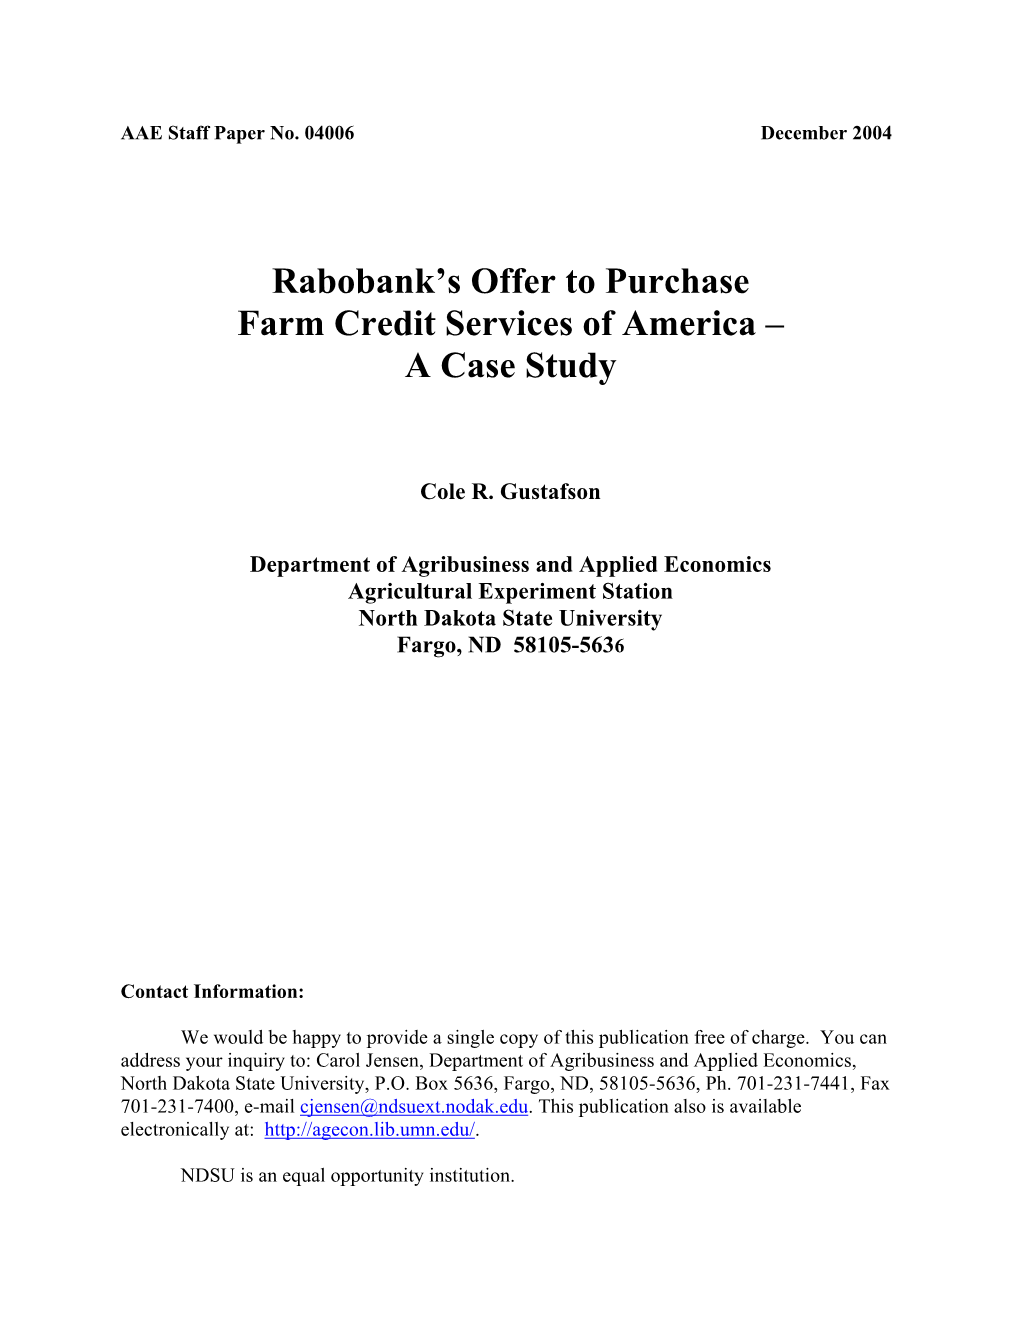 Rabobank's Offer to Purchase Farm Credit Services Of